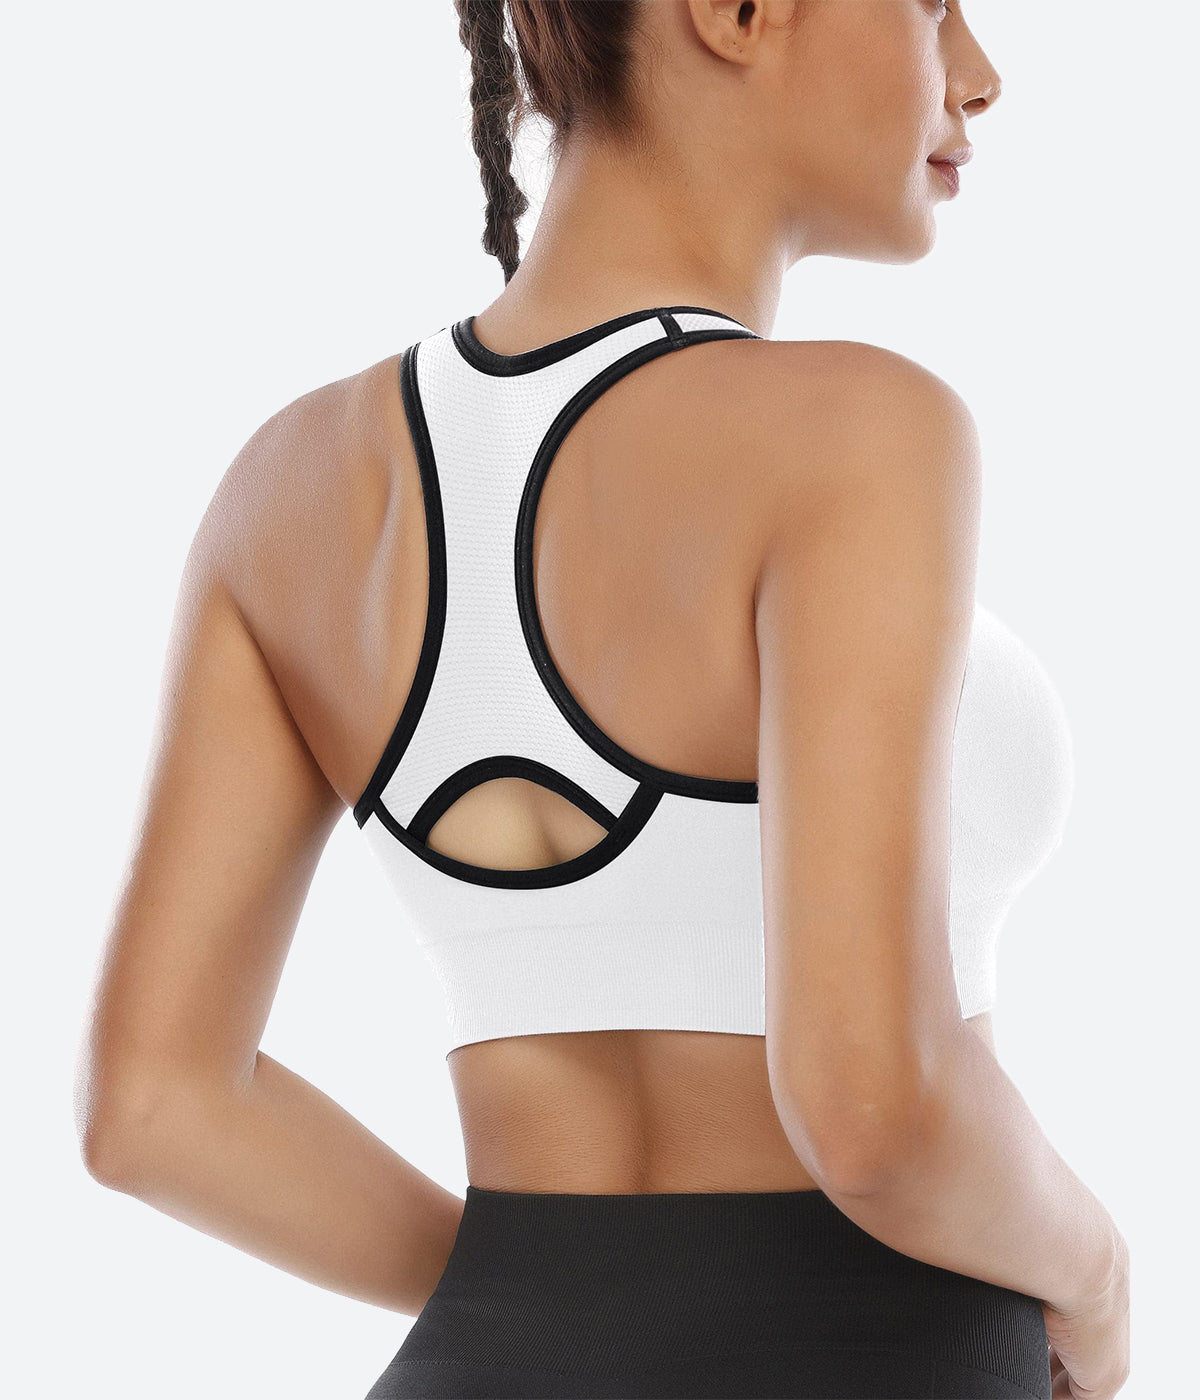 Buy Sports Bra for Women High Impact Gym Yoga Strappy Padded Racerback Bras  Large Bust Exercise Athletic Bras Free Size (28-30) Pack of 1 Black Colour  at